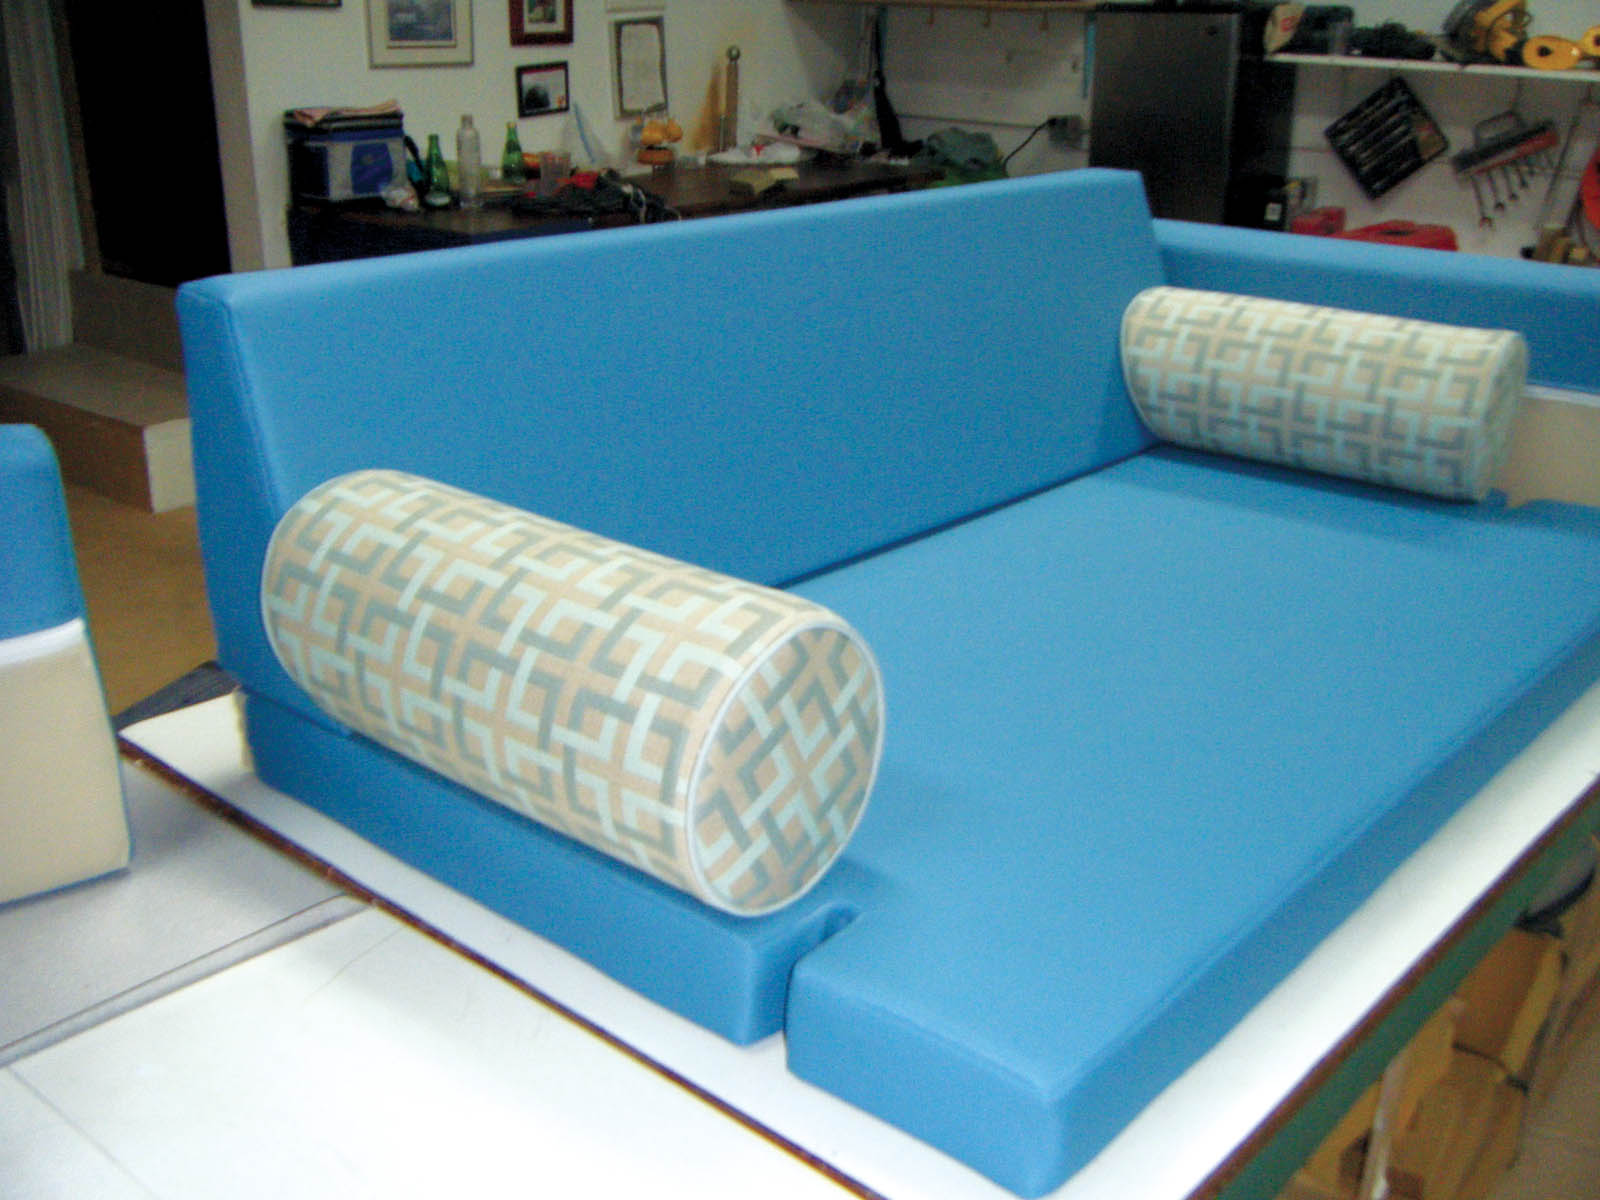 Choosing the right foam for your seating project - Specialty Fabrics Review